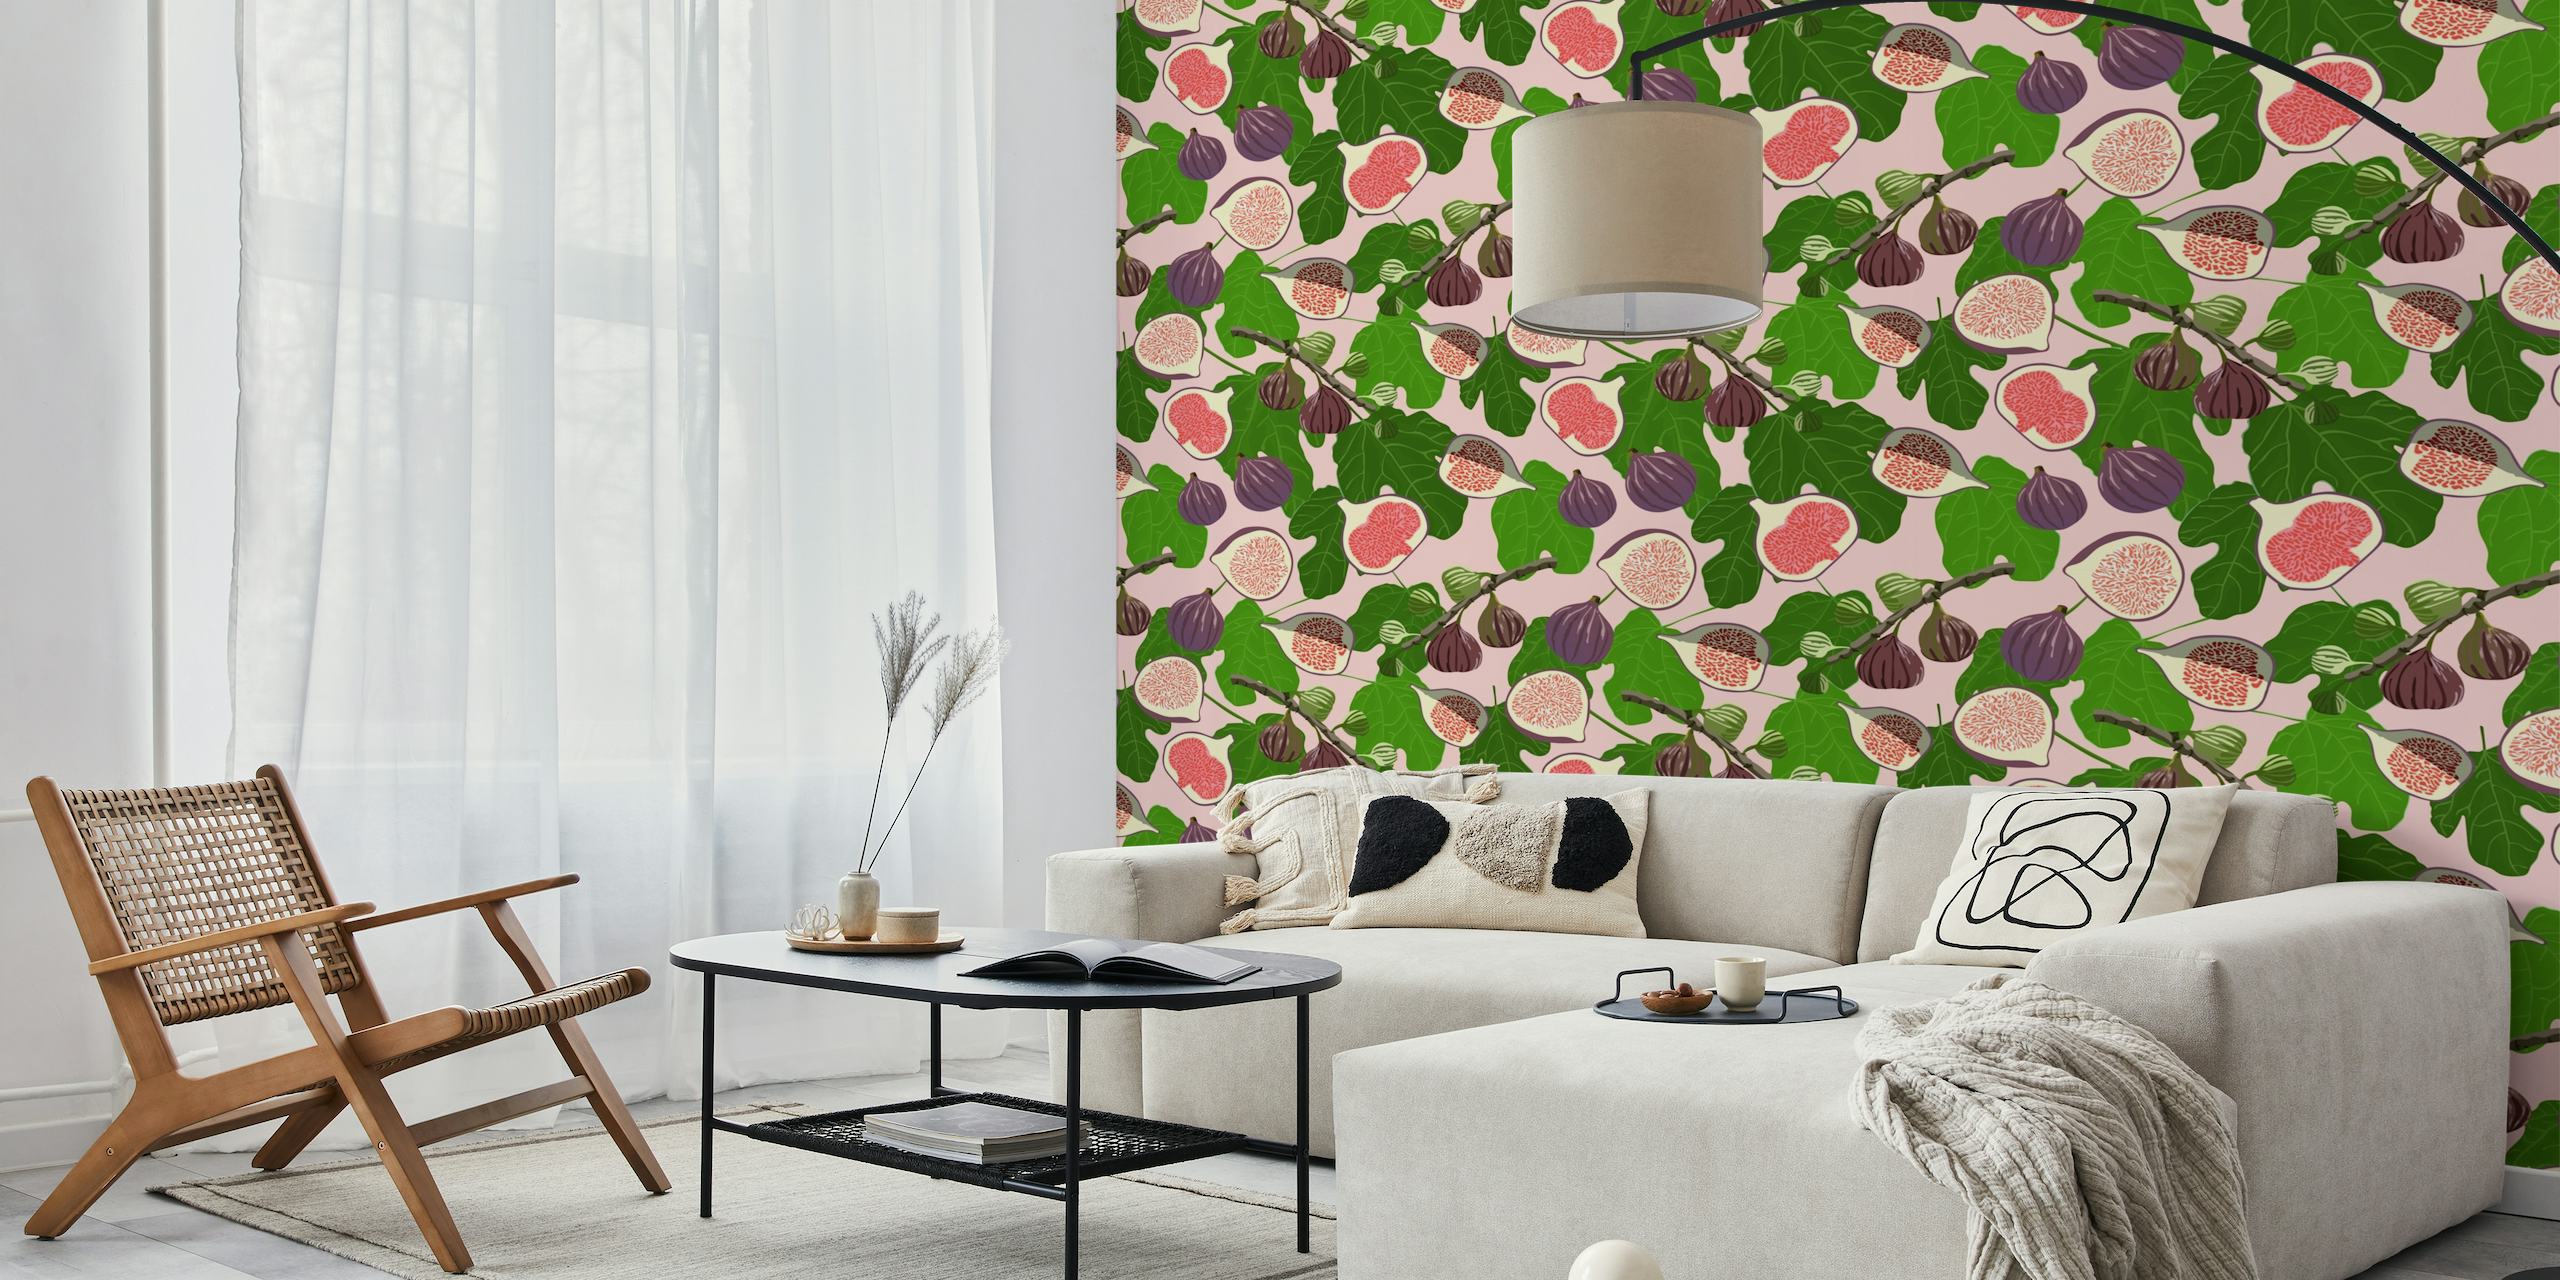 Bright and inviting 'Figs and Leaves' wall mural with pink and purple figs amidst green foliage pattern